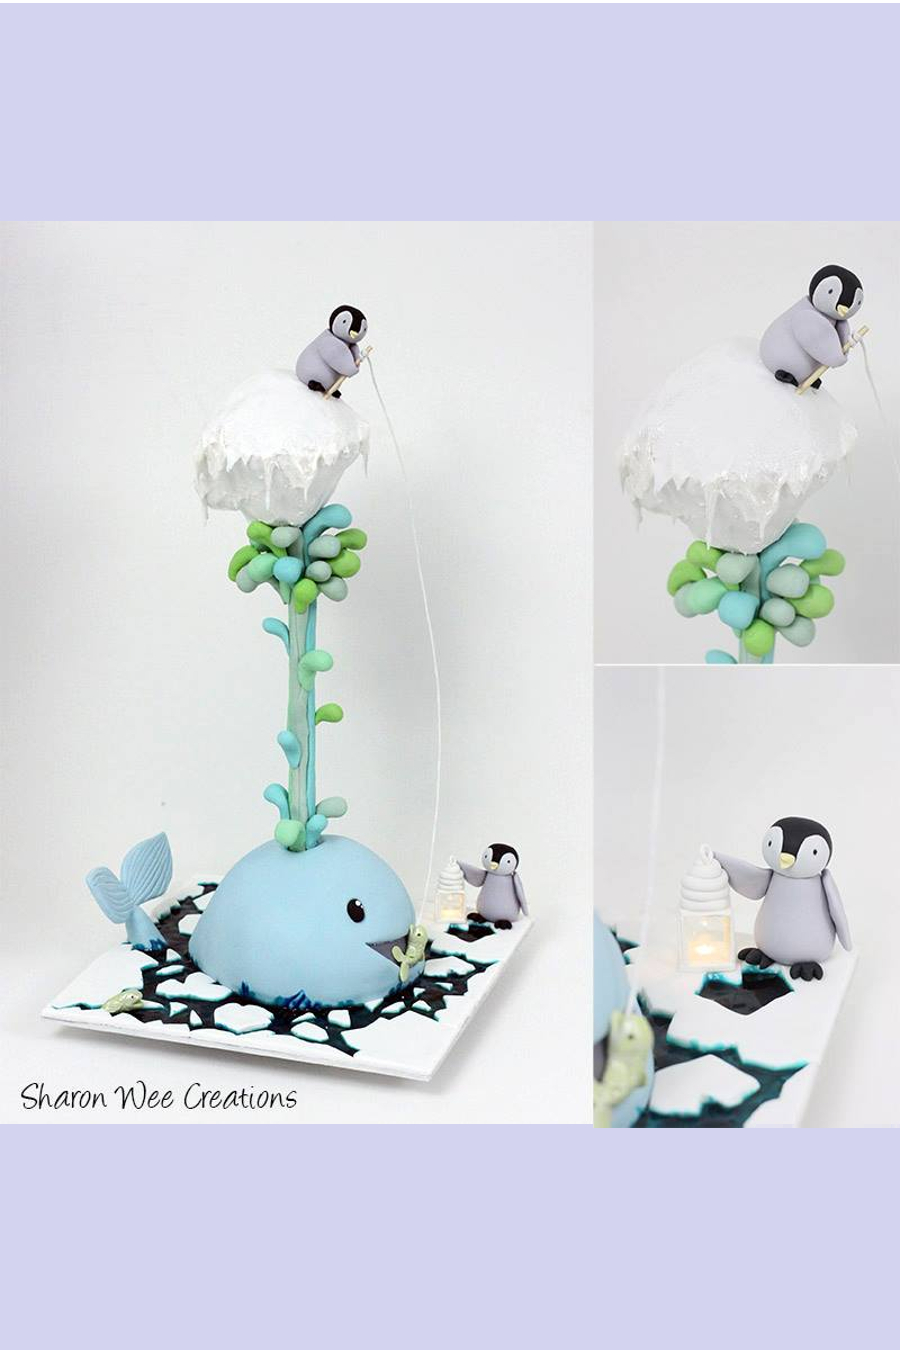 Sharon Wee Creations - Penguins